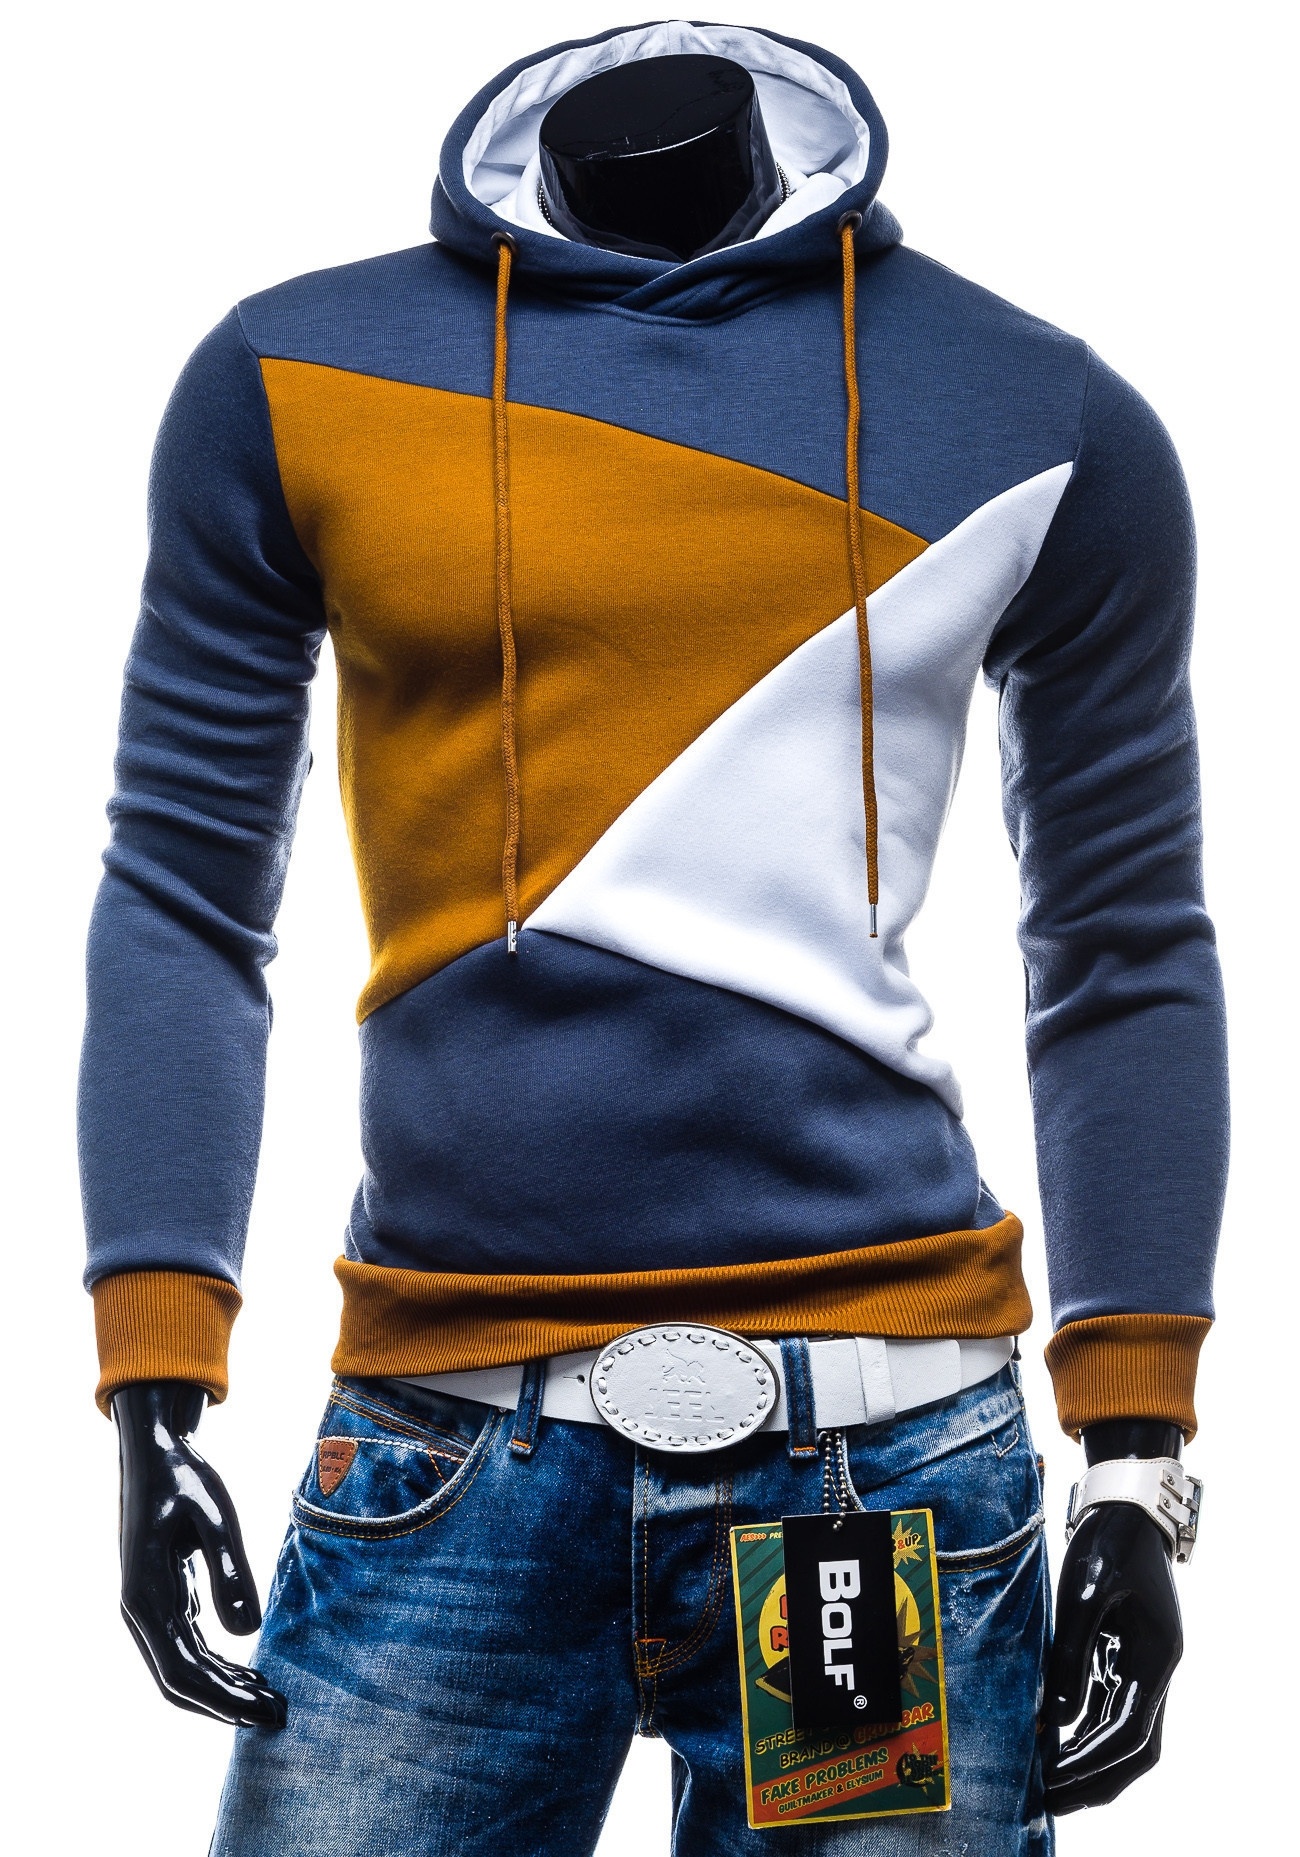 015spring fashion new contract color hoodies sweatshirts men,outerwear colorful hoodies clothing men,sport suit